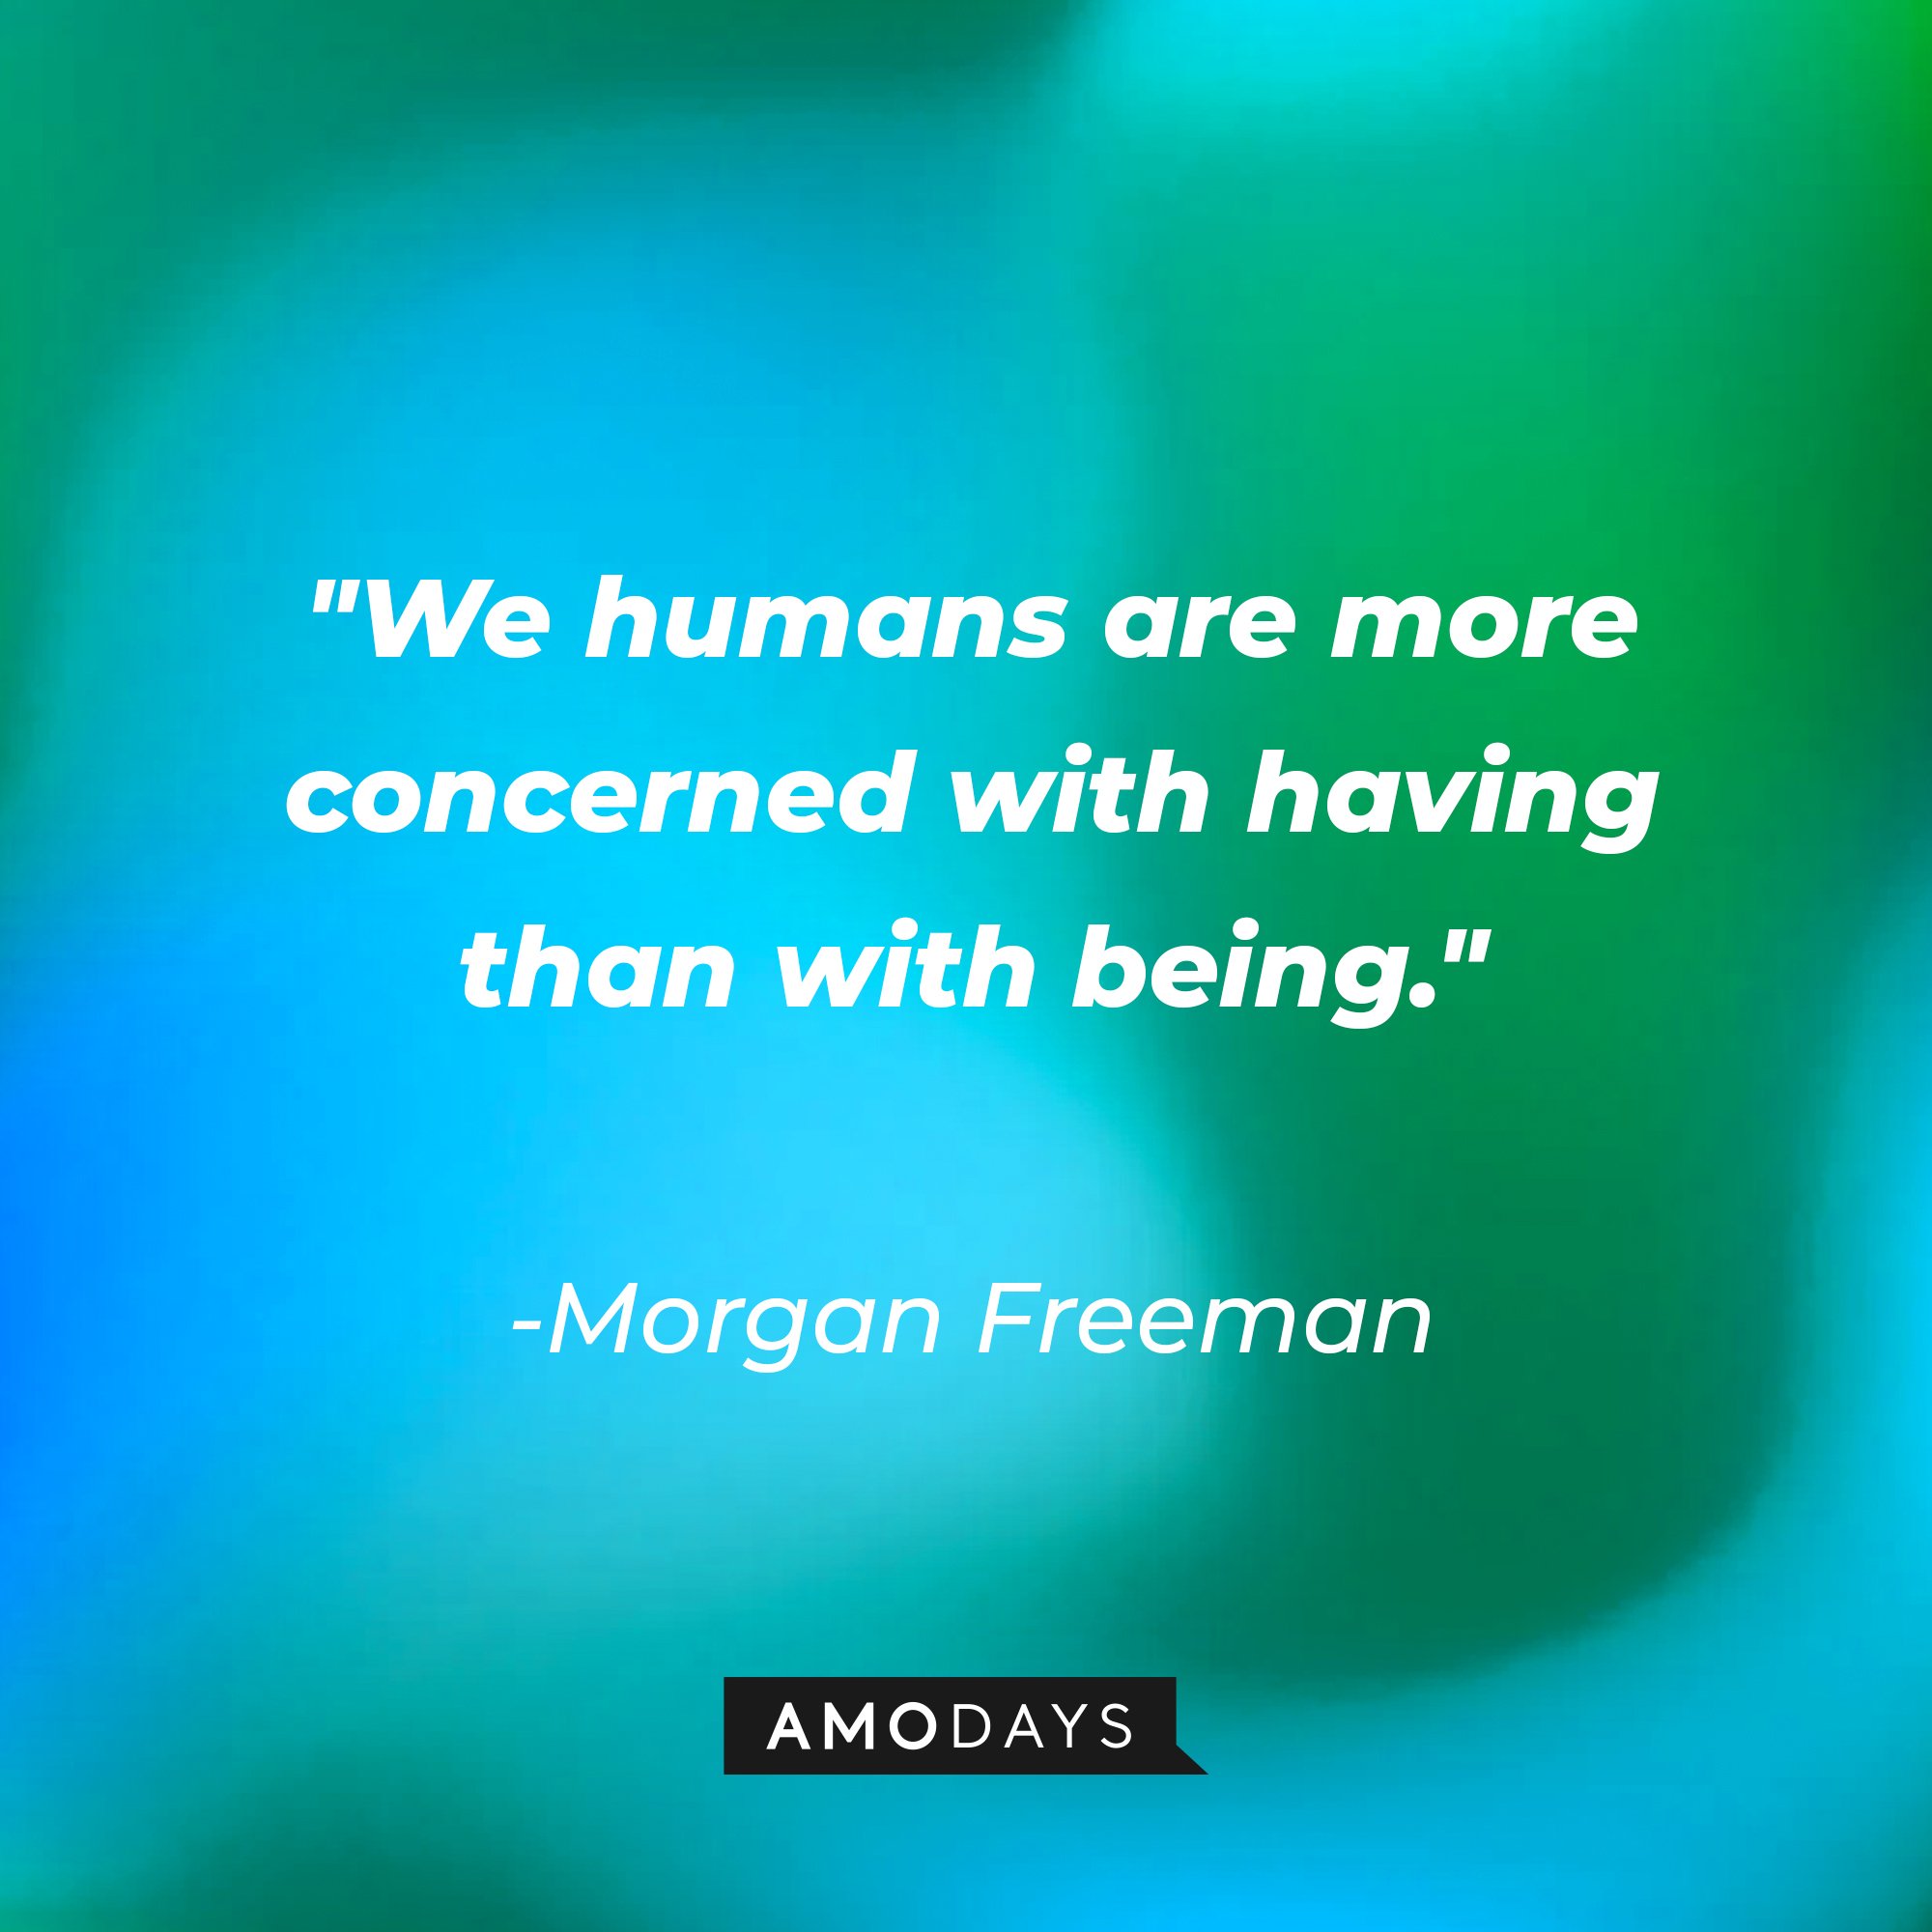  Morgan Freeman's quote: "We humans are more concerned with having than with being." | Image: AmoDays